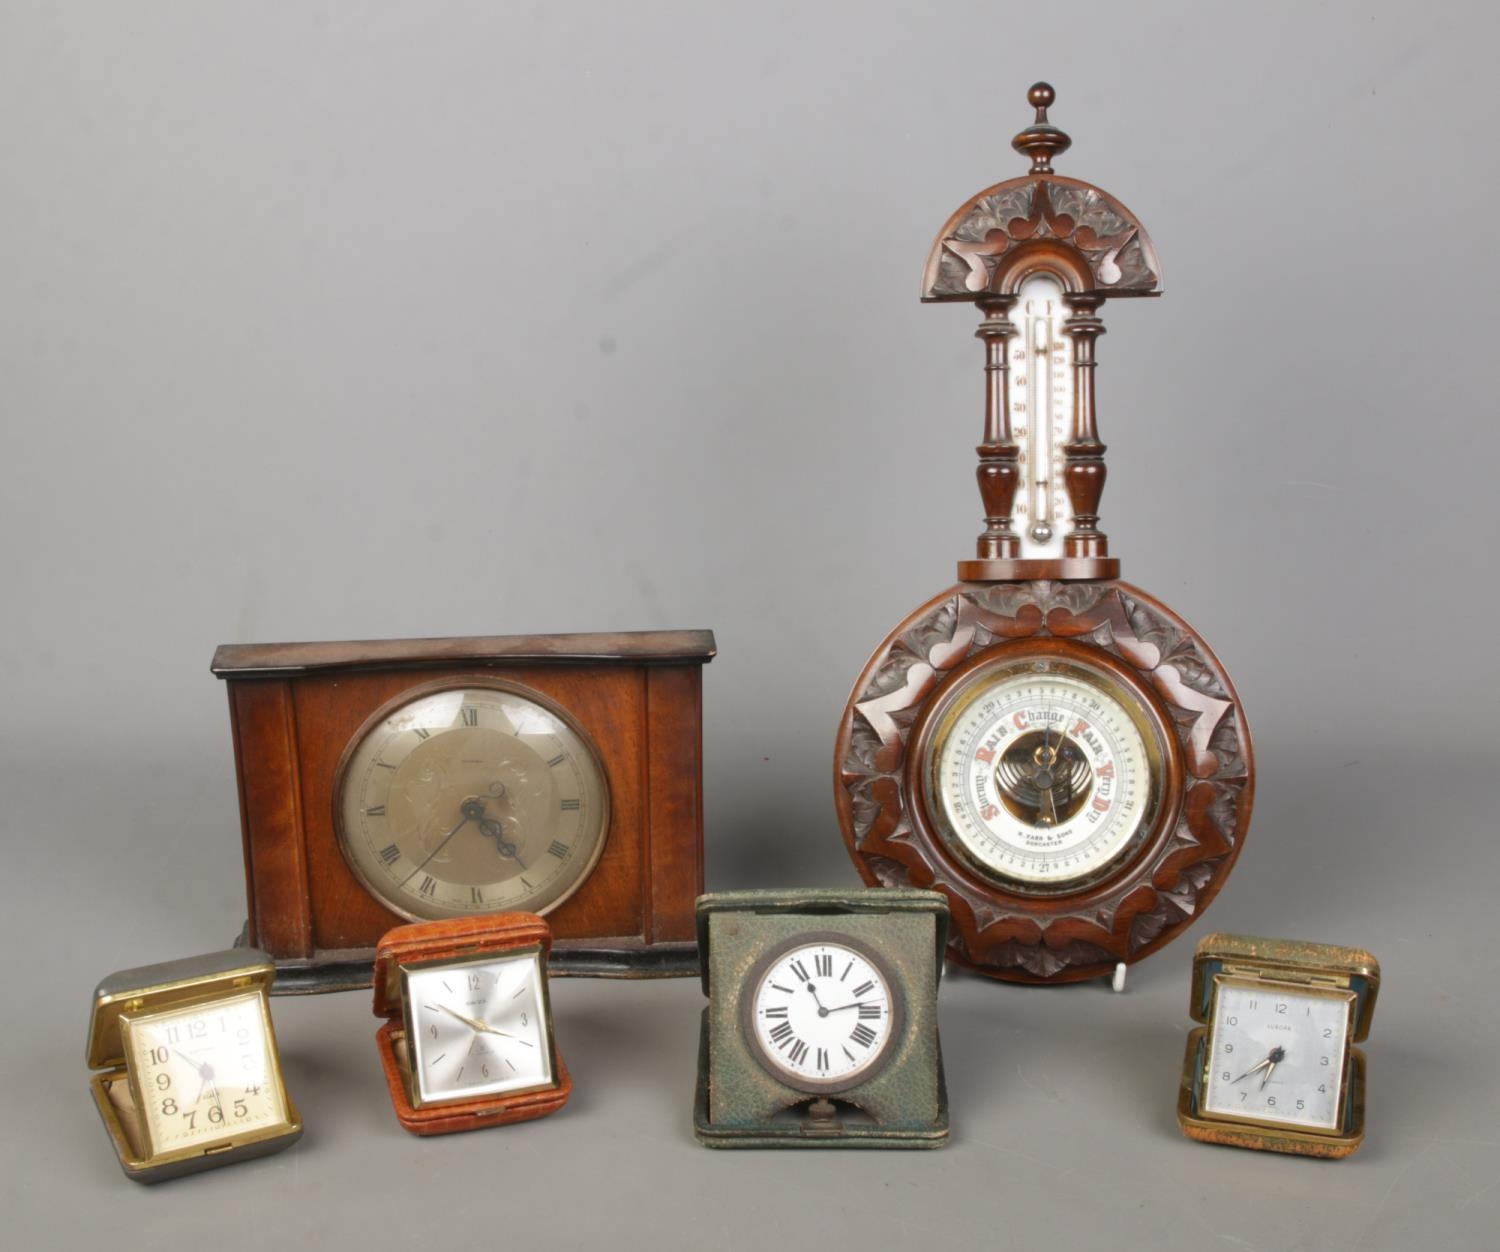 A collections of clocks, together with an R.Farr & Sons Doncaster carved aneroid barometer. To